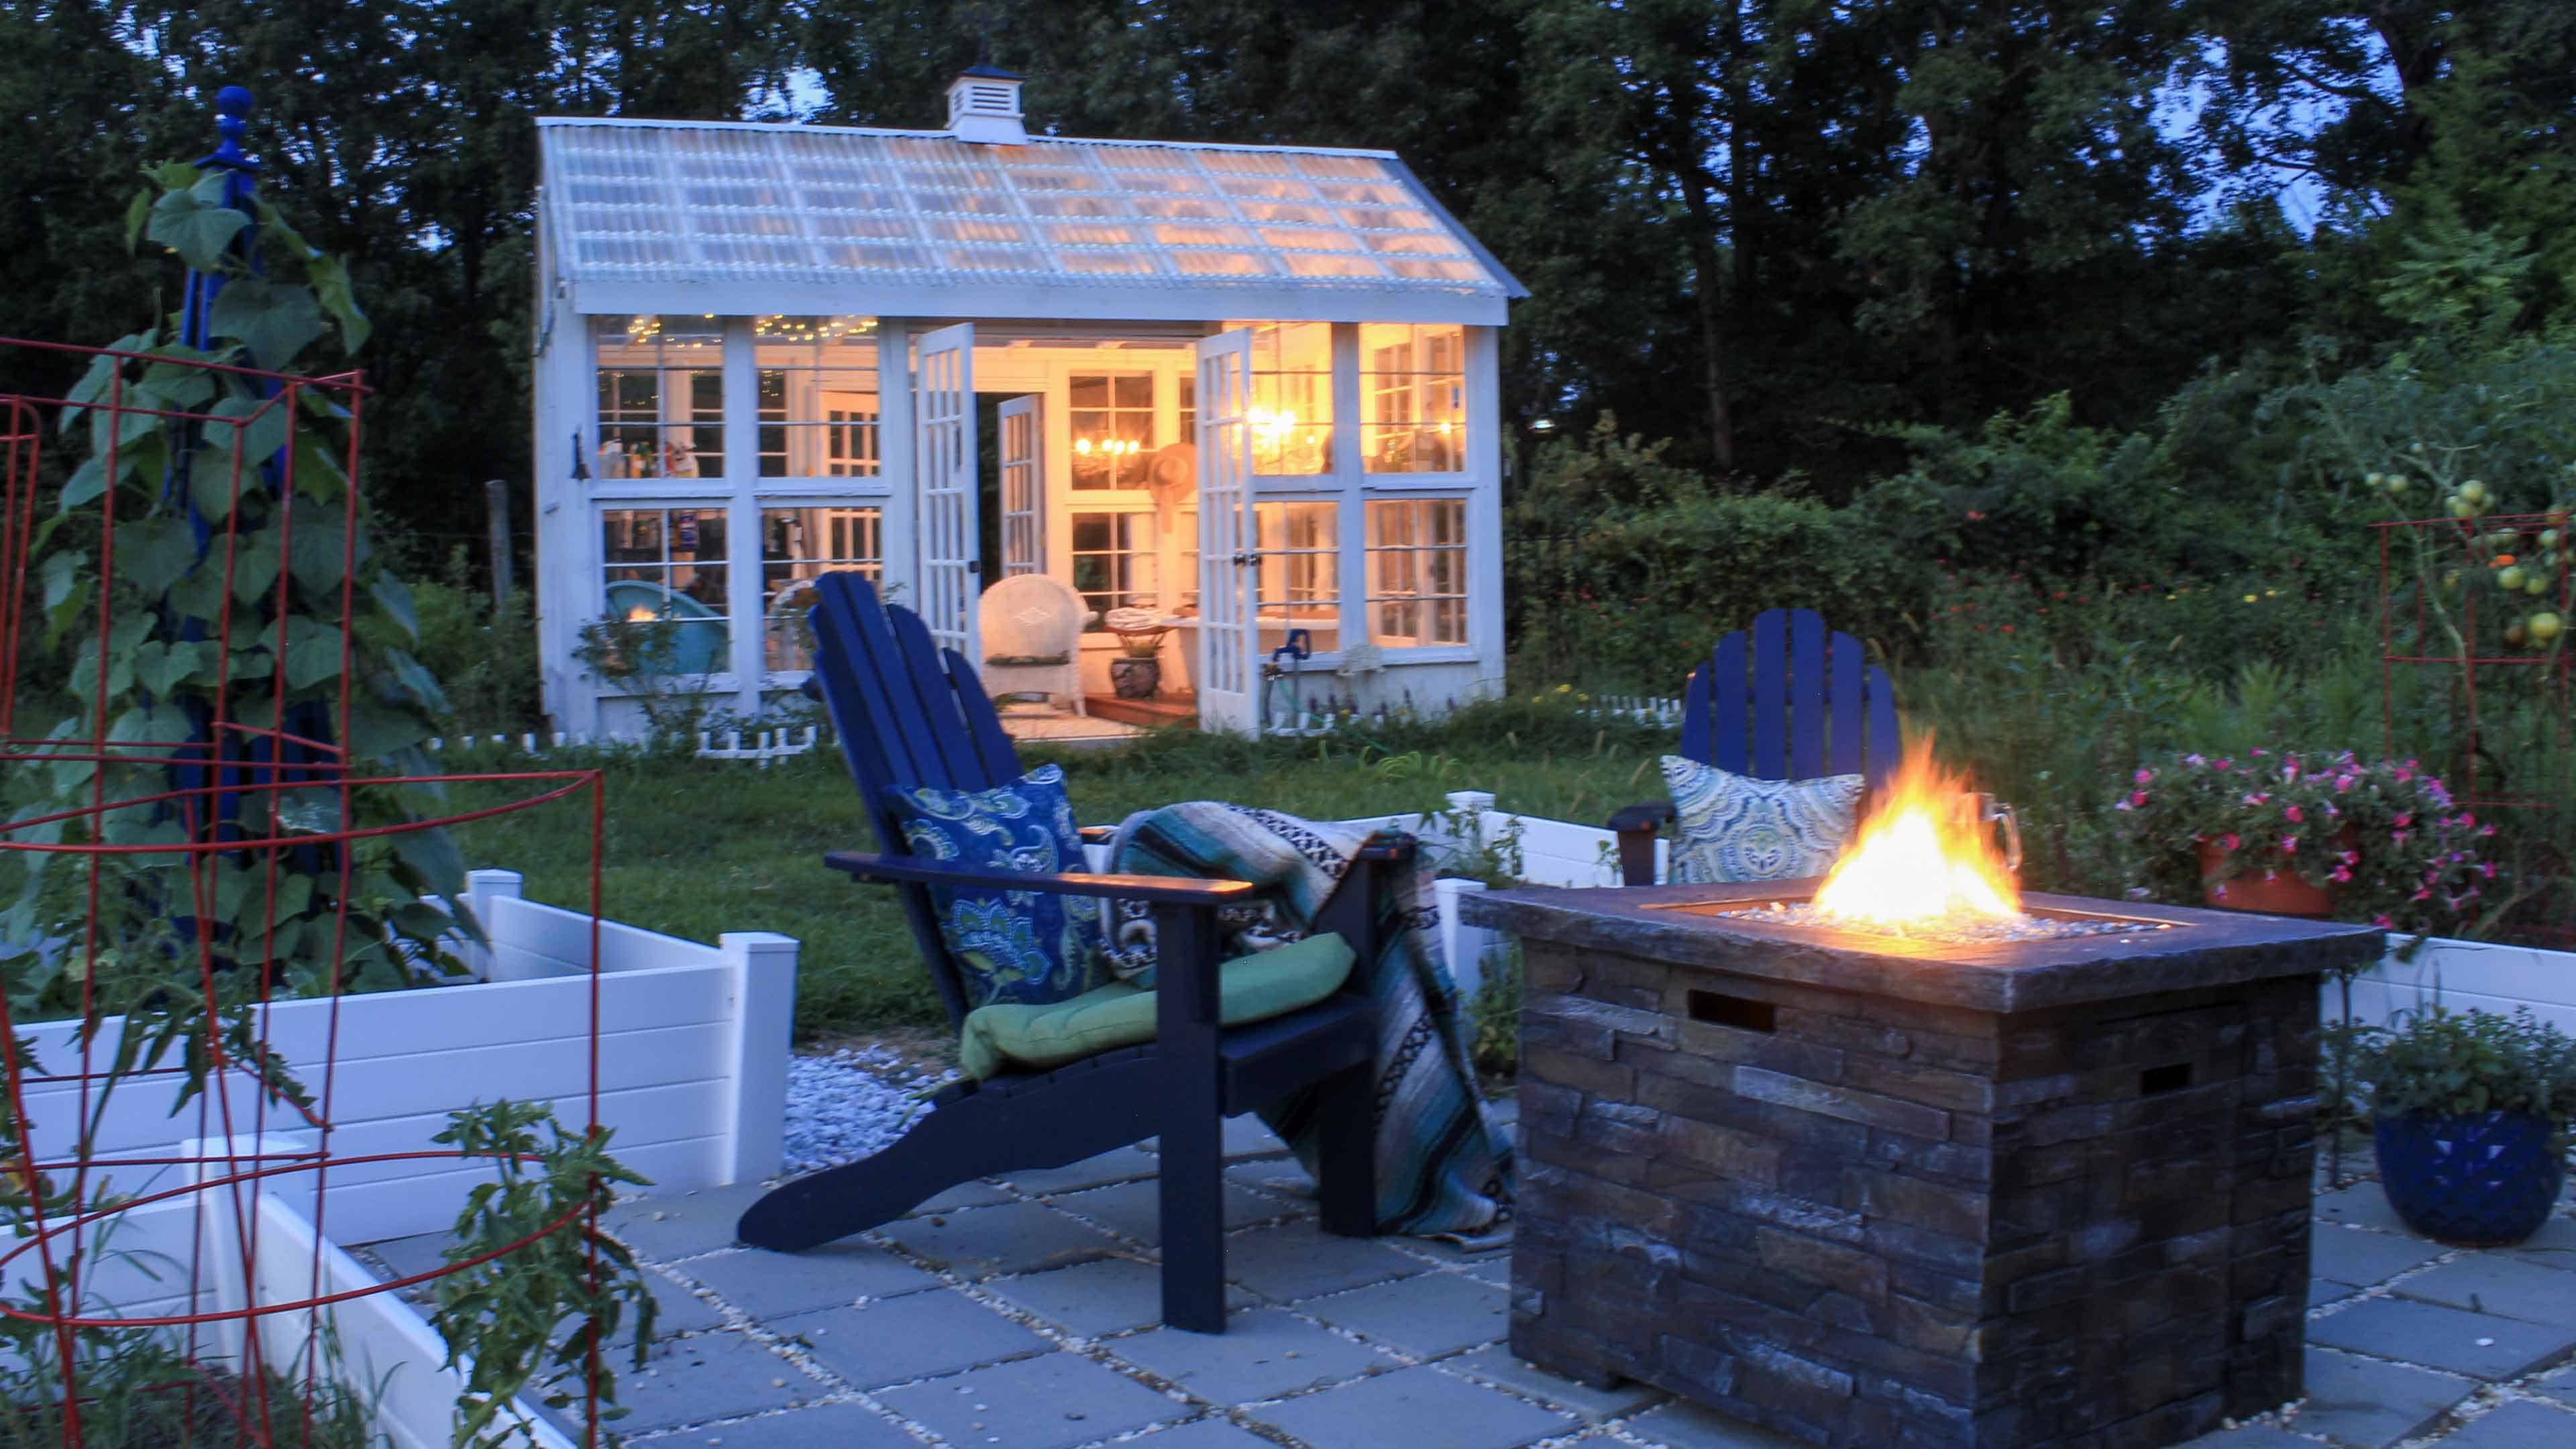 Extend your outdoor living into the fall with firepits, lighting and by adding seasonal plants